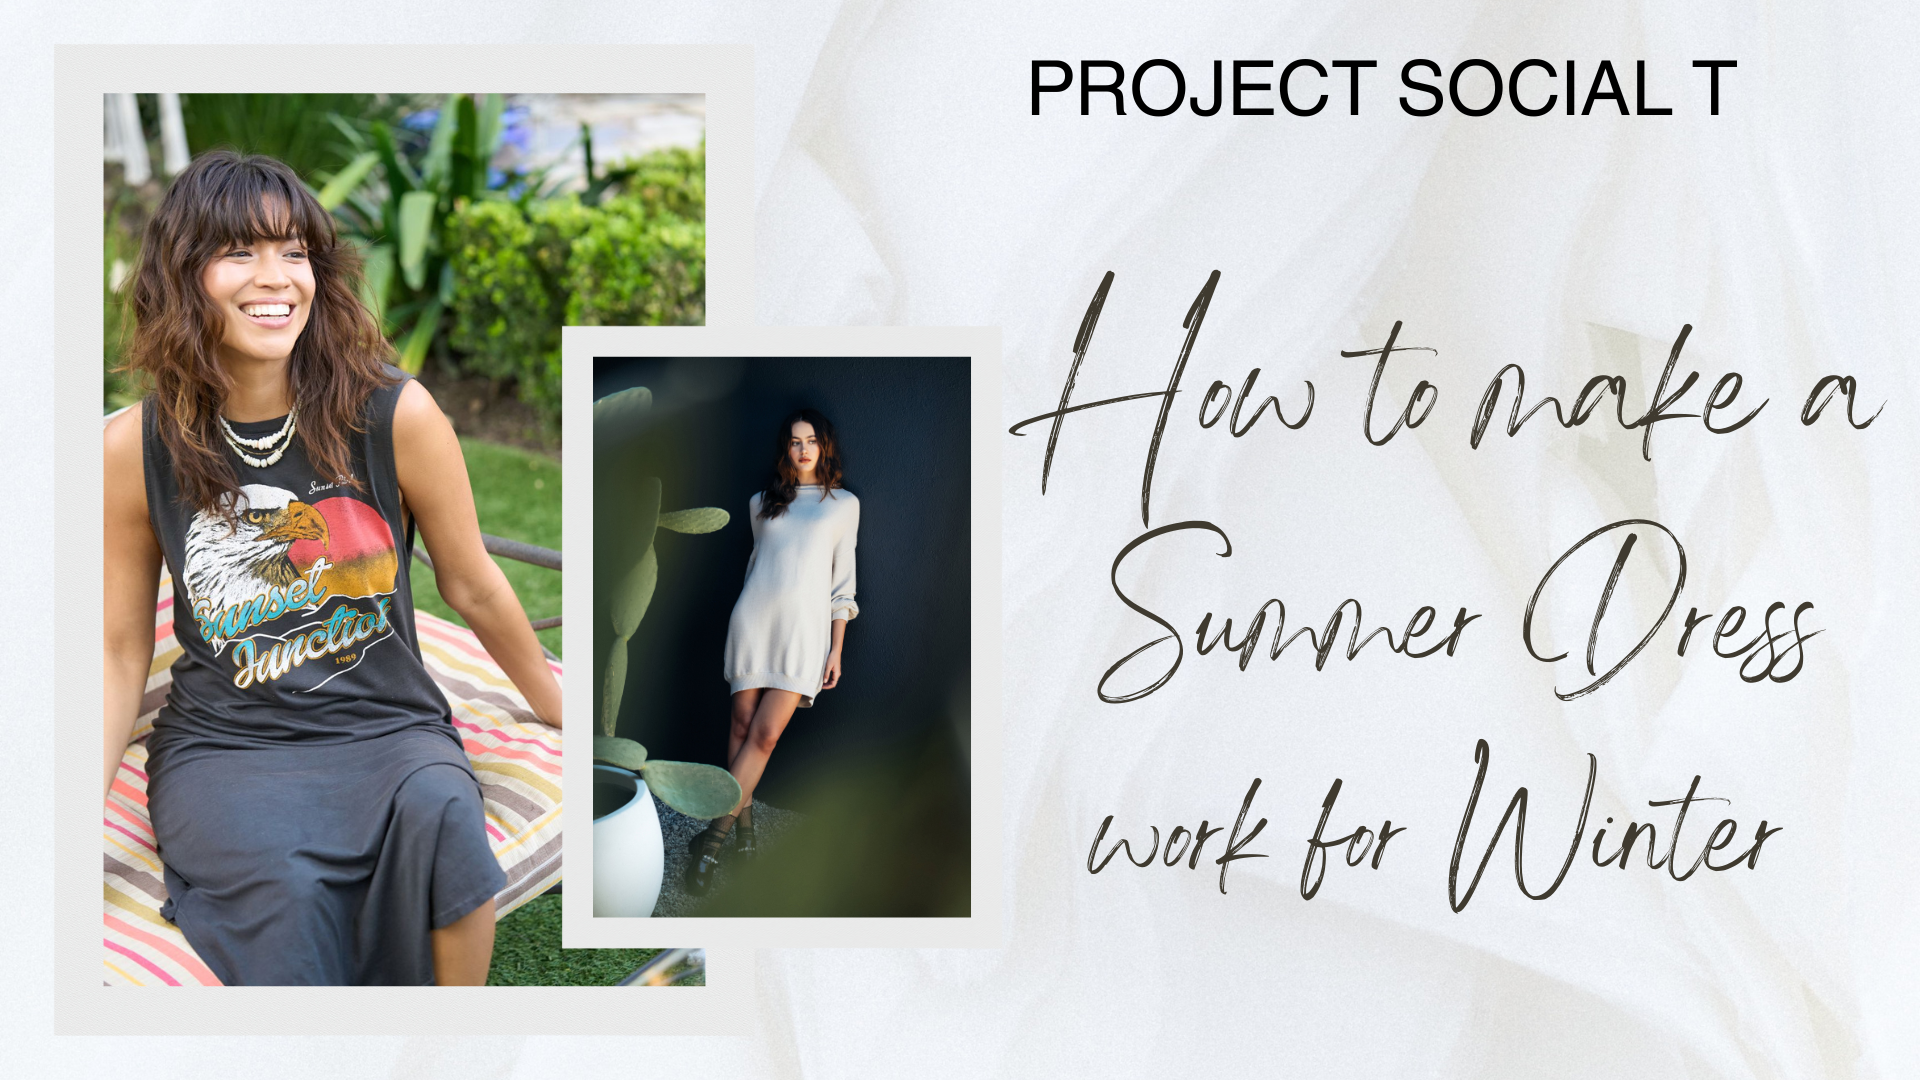 How to Make a Summer Dress Work for Winter – PROJECT SOCIAL T